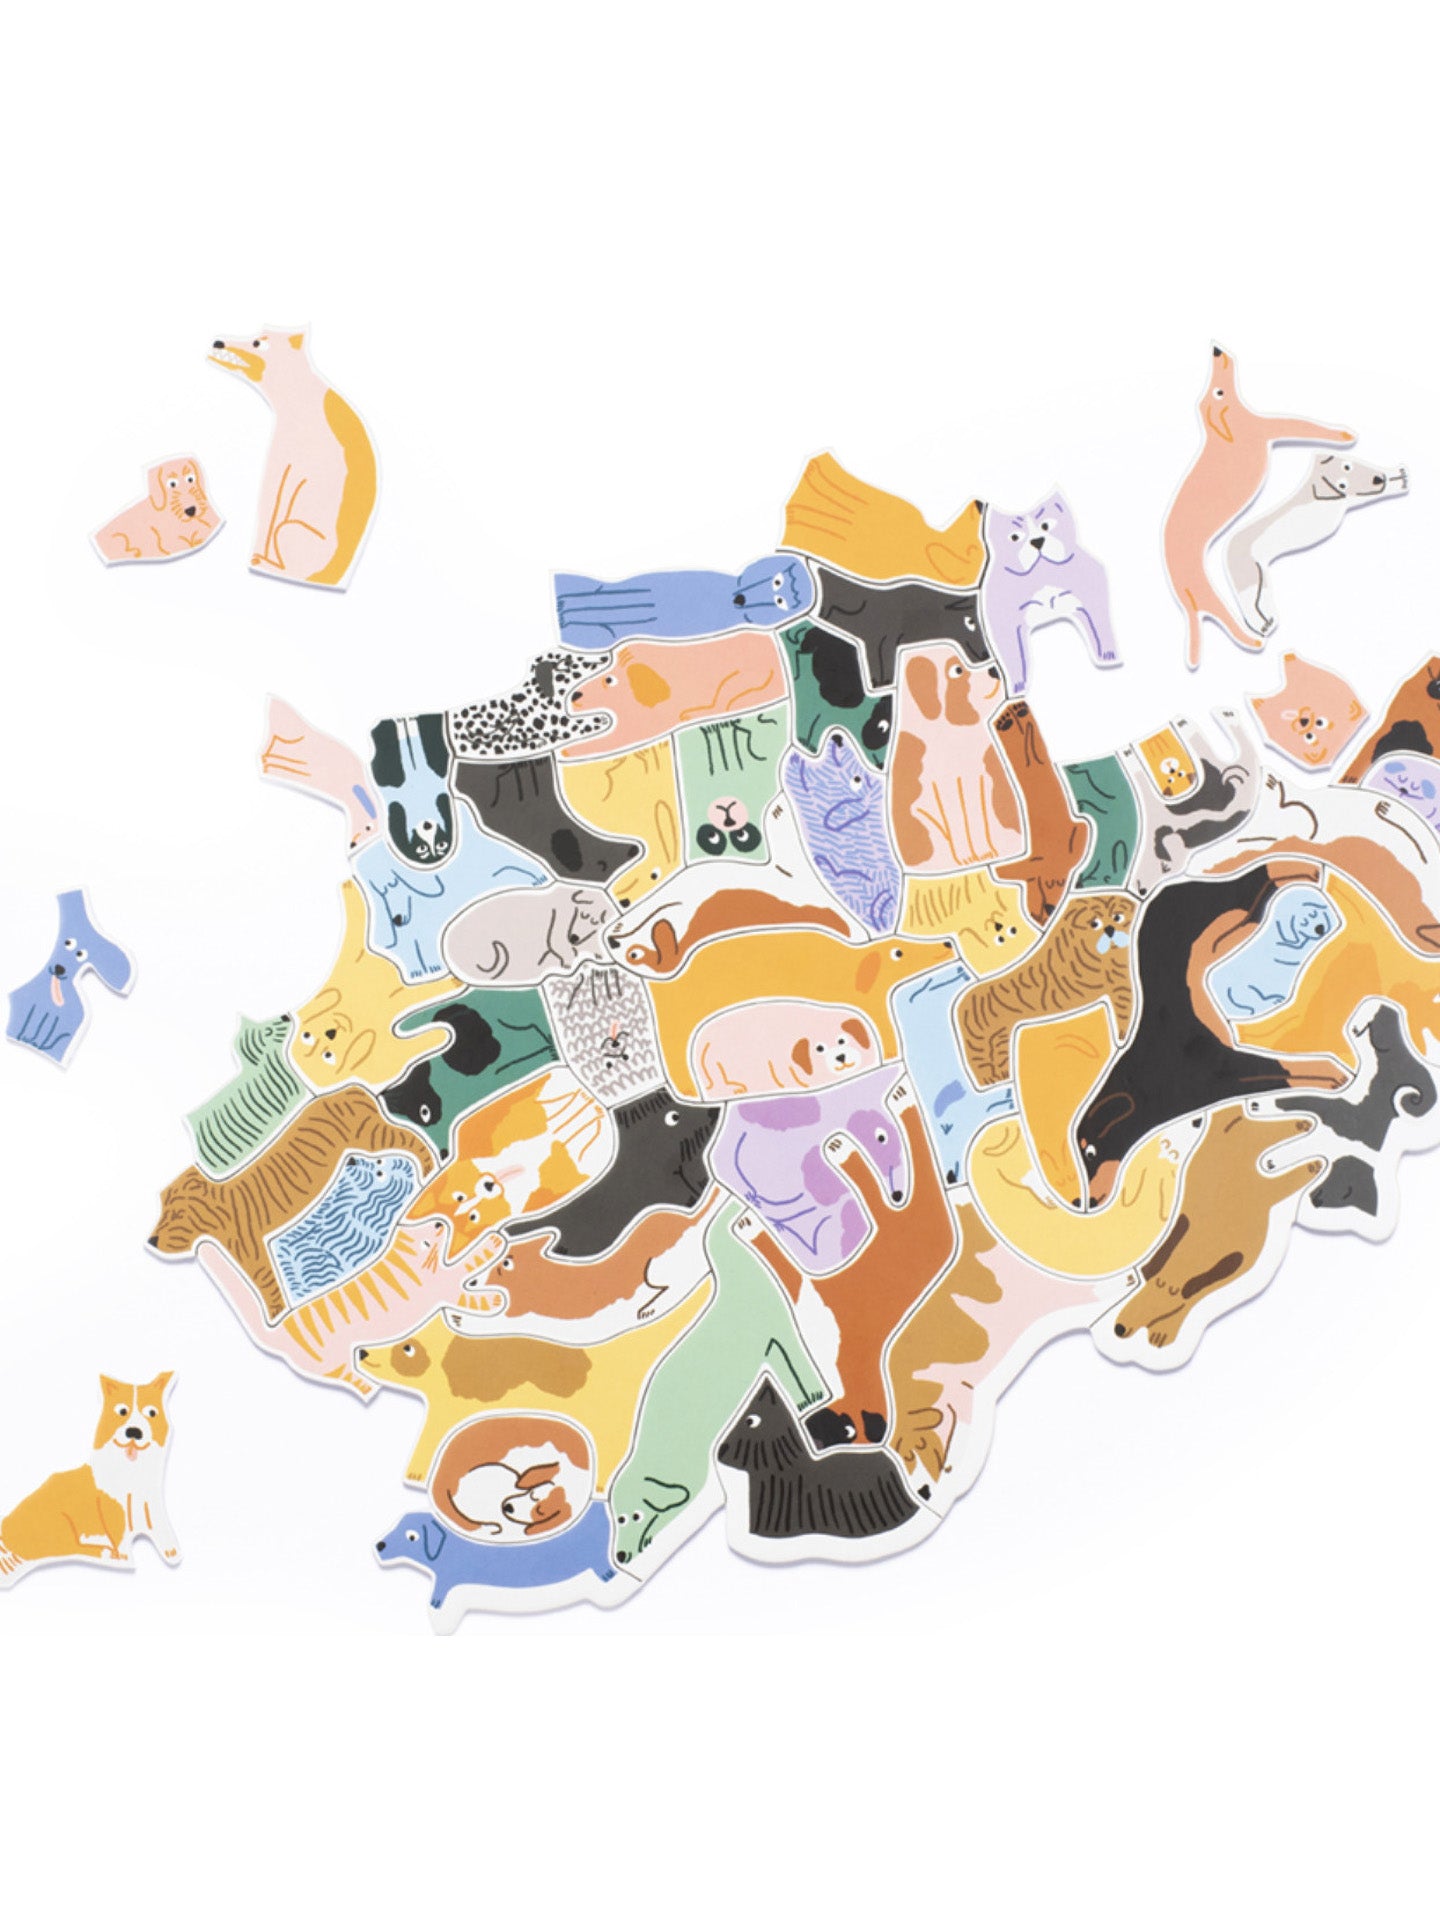 299 Dogs (and a cat) A canine cluster puzzle